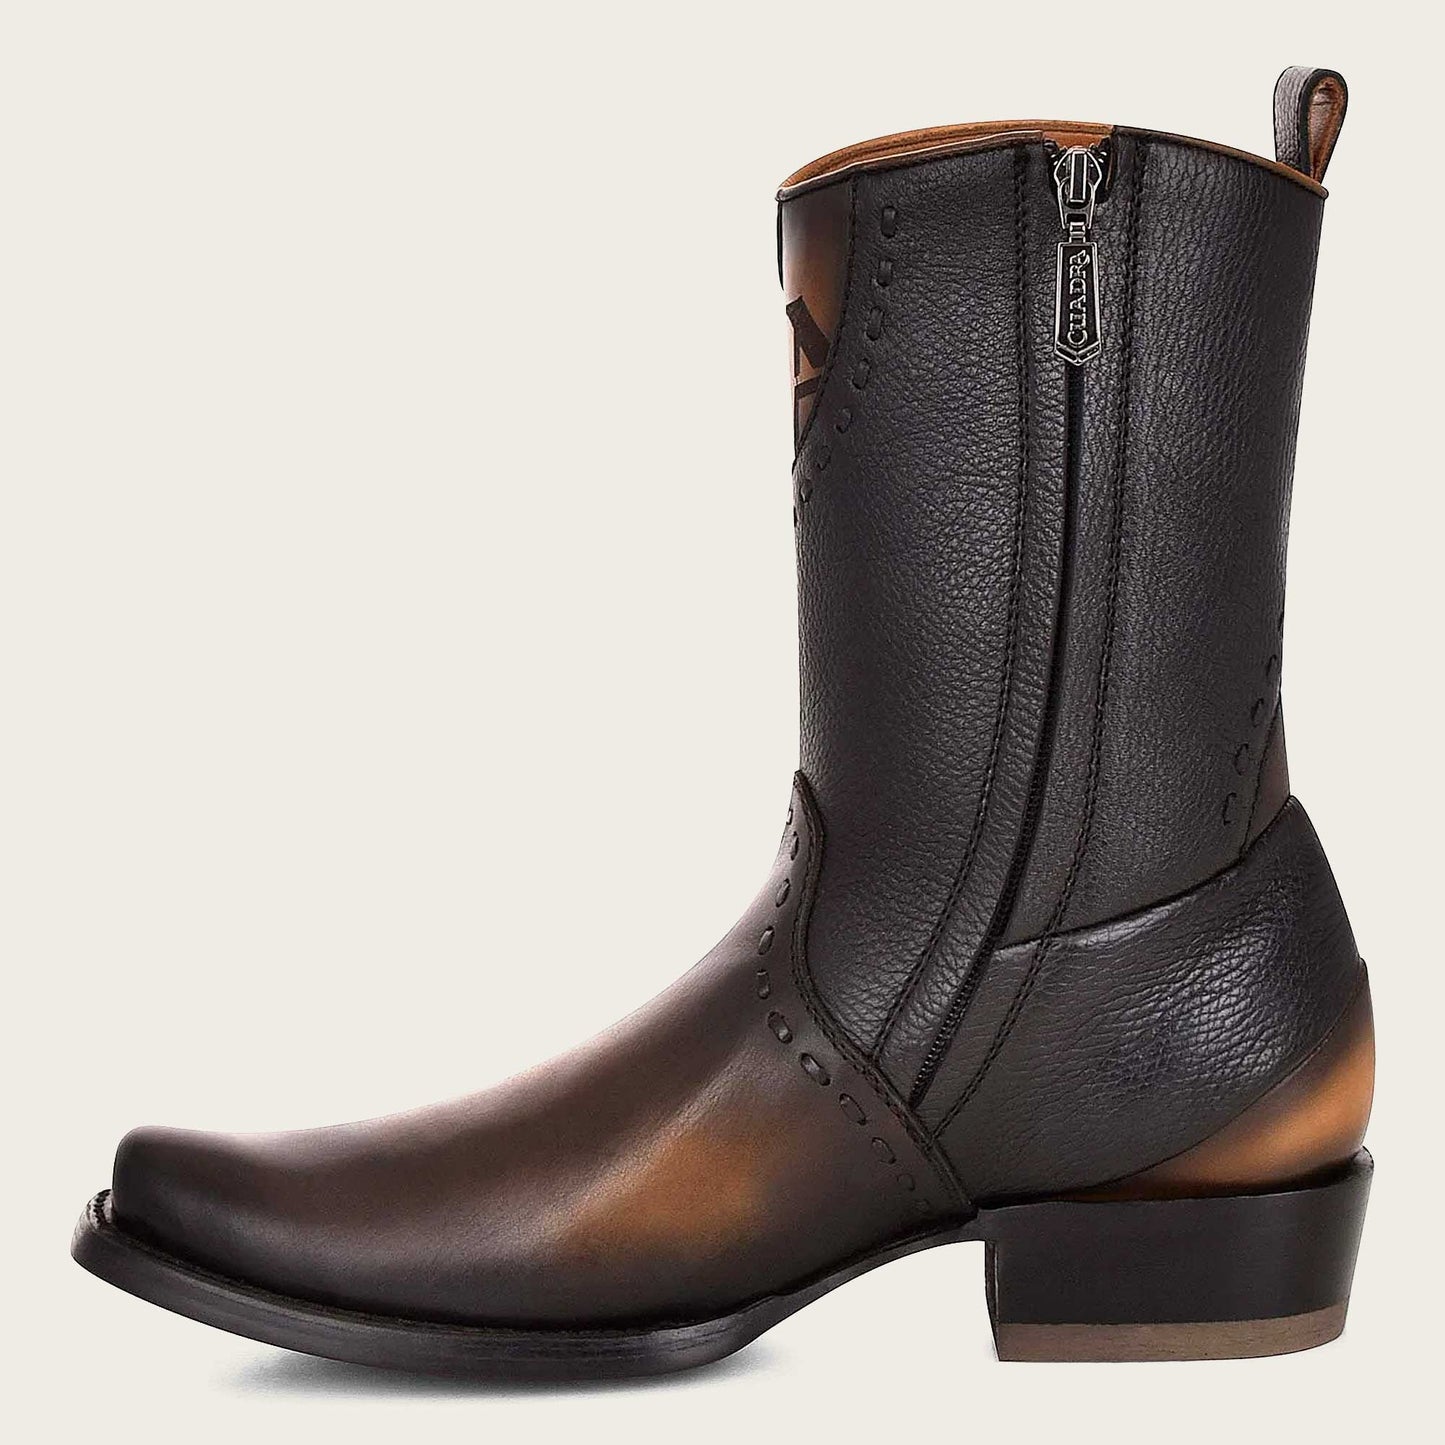 Engraved black leather boot - a classic and stylish addition to your footwear collection.